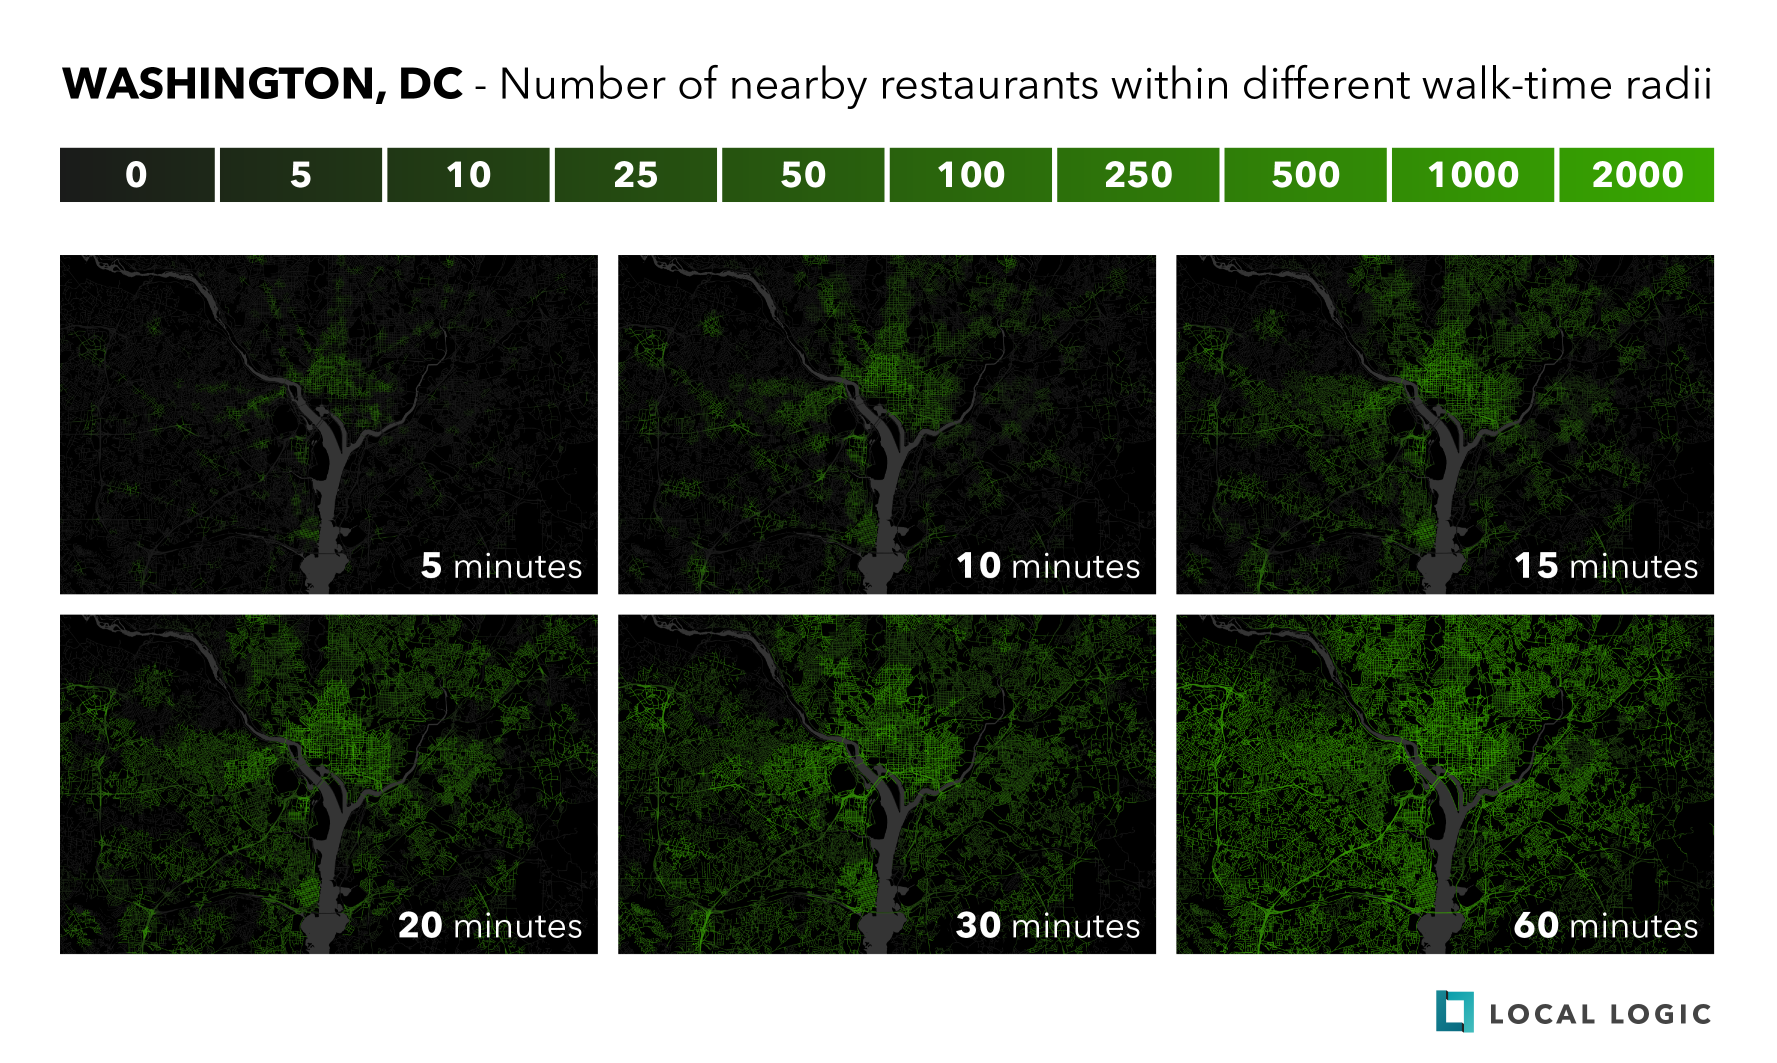 Graph showcasing the number of nearby restaurants within walking distance to the potomac river in washington dc